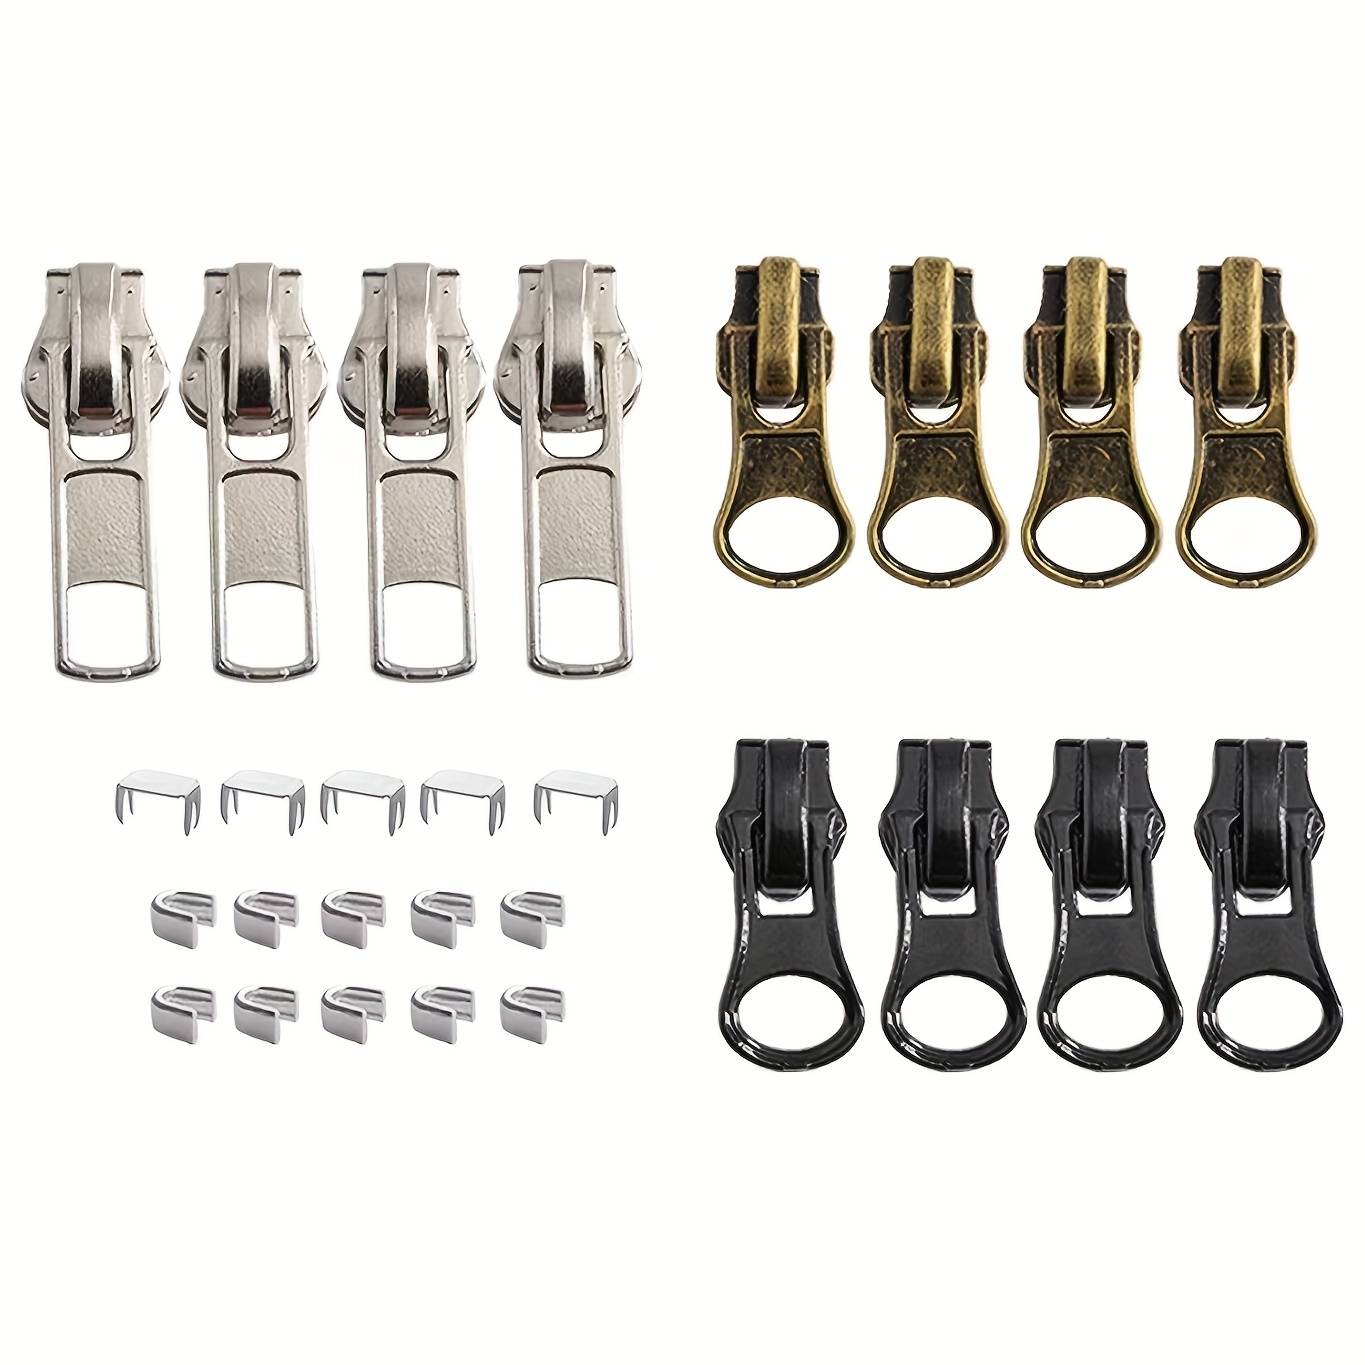 27pcs 5 Zipper Slider Repair Kits Black Bronze And Silvery Zipper Sliders  Zipper Pull Replacement For Metal Plastic And Nylon Coil Jacket Zippers, Shop Now For Limited-time Deals